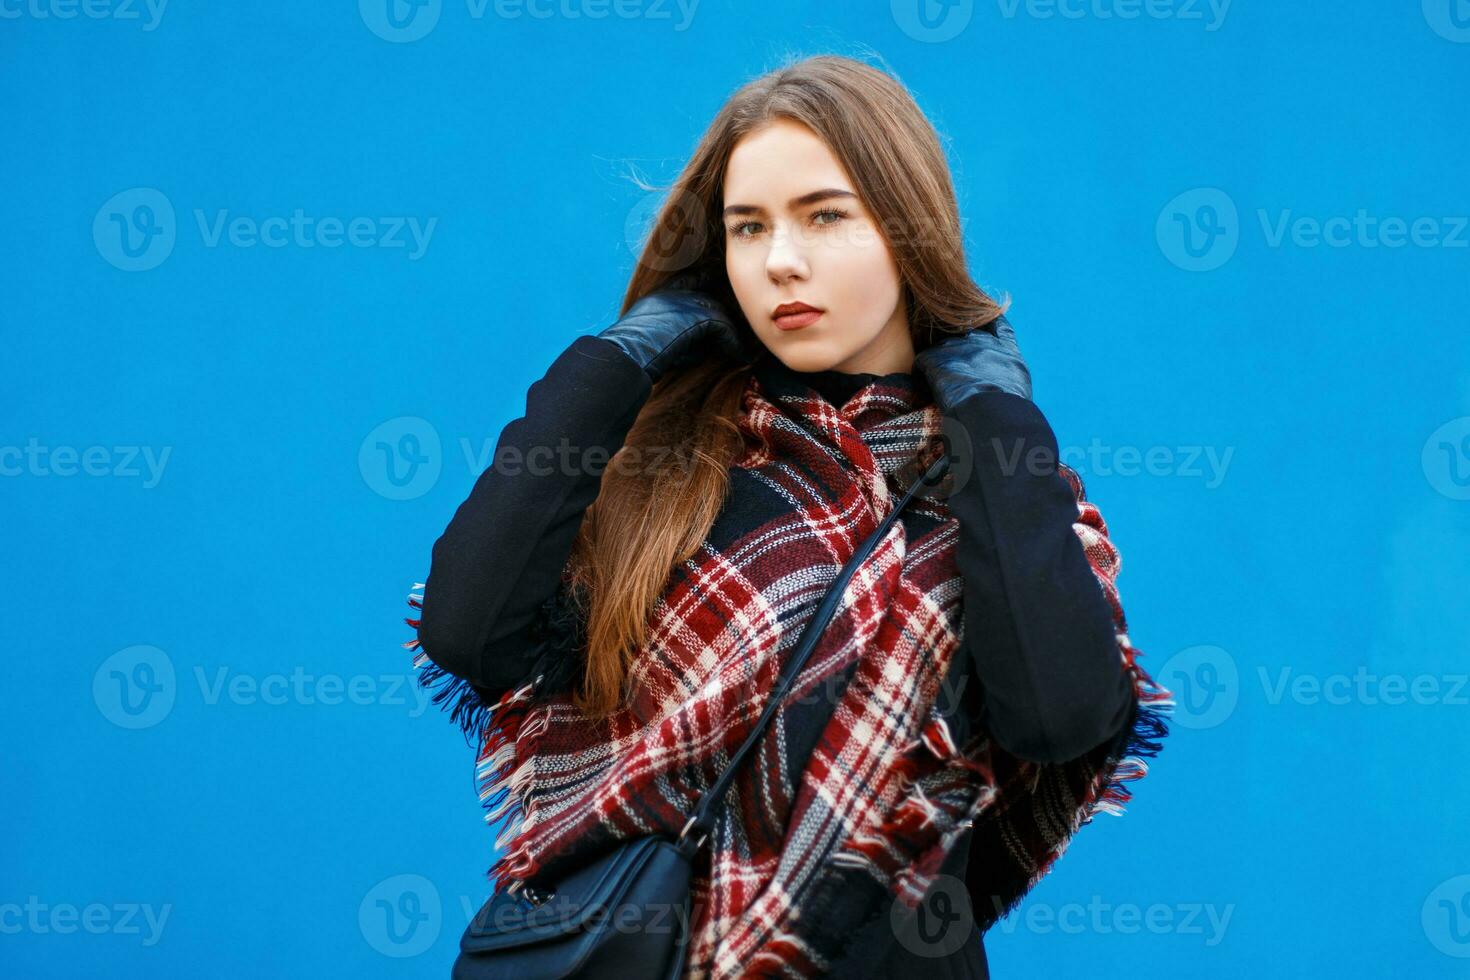 Beautiful woman with a scarf and coat posing near a bright blue wall photo